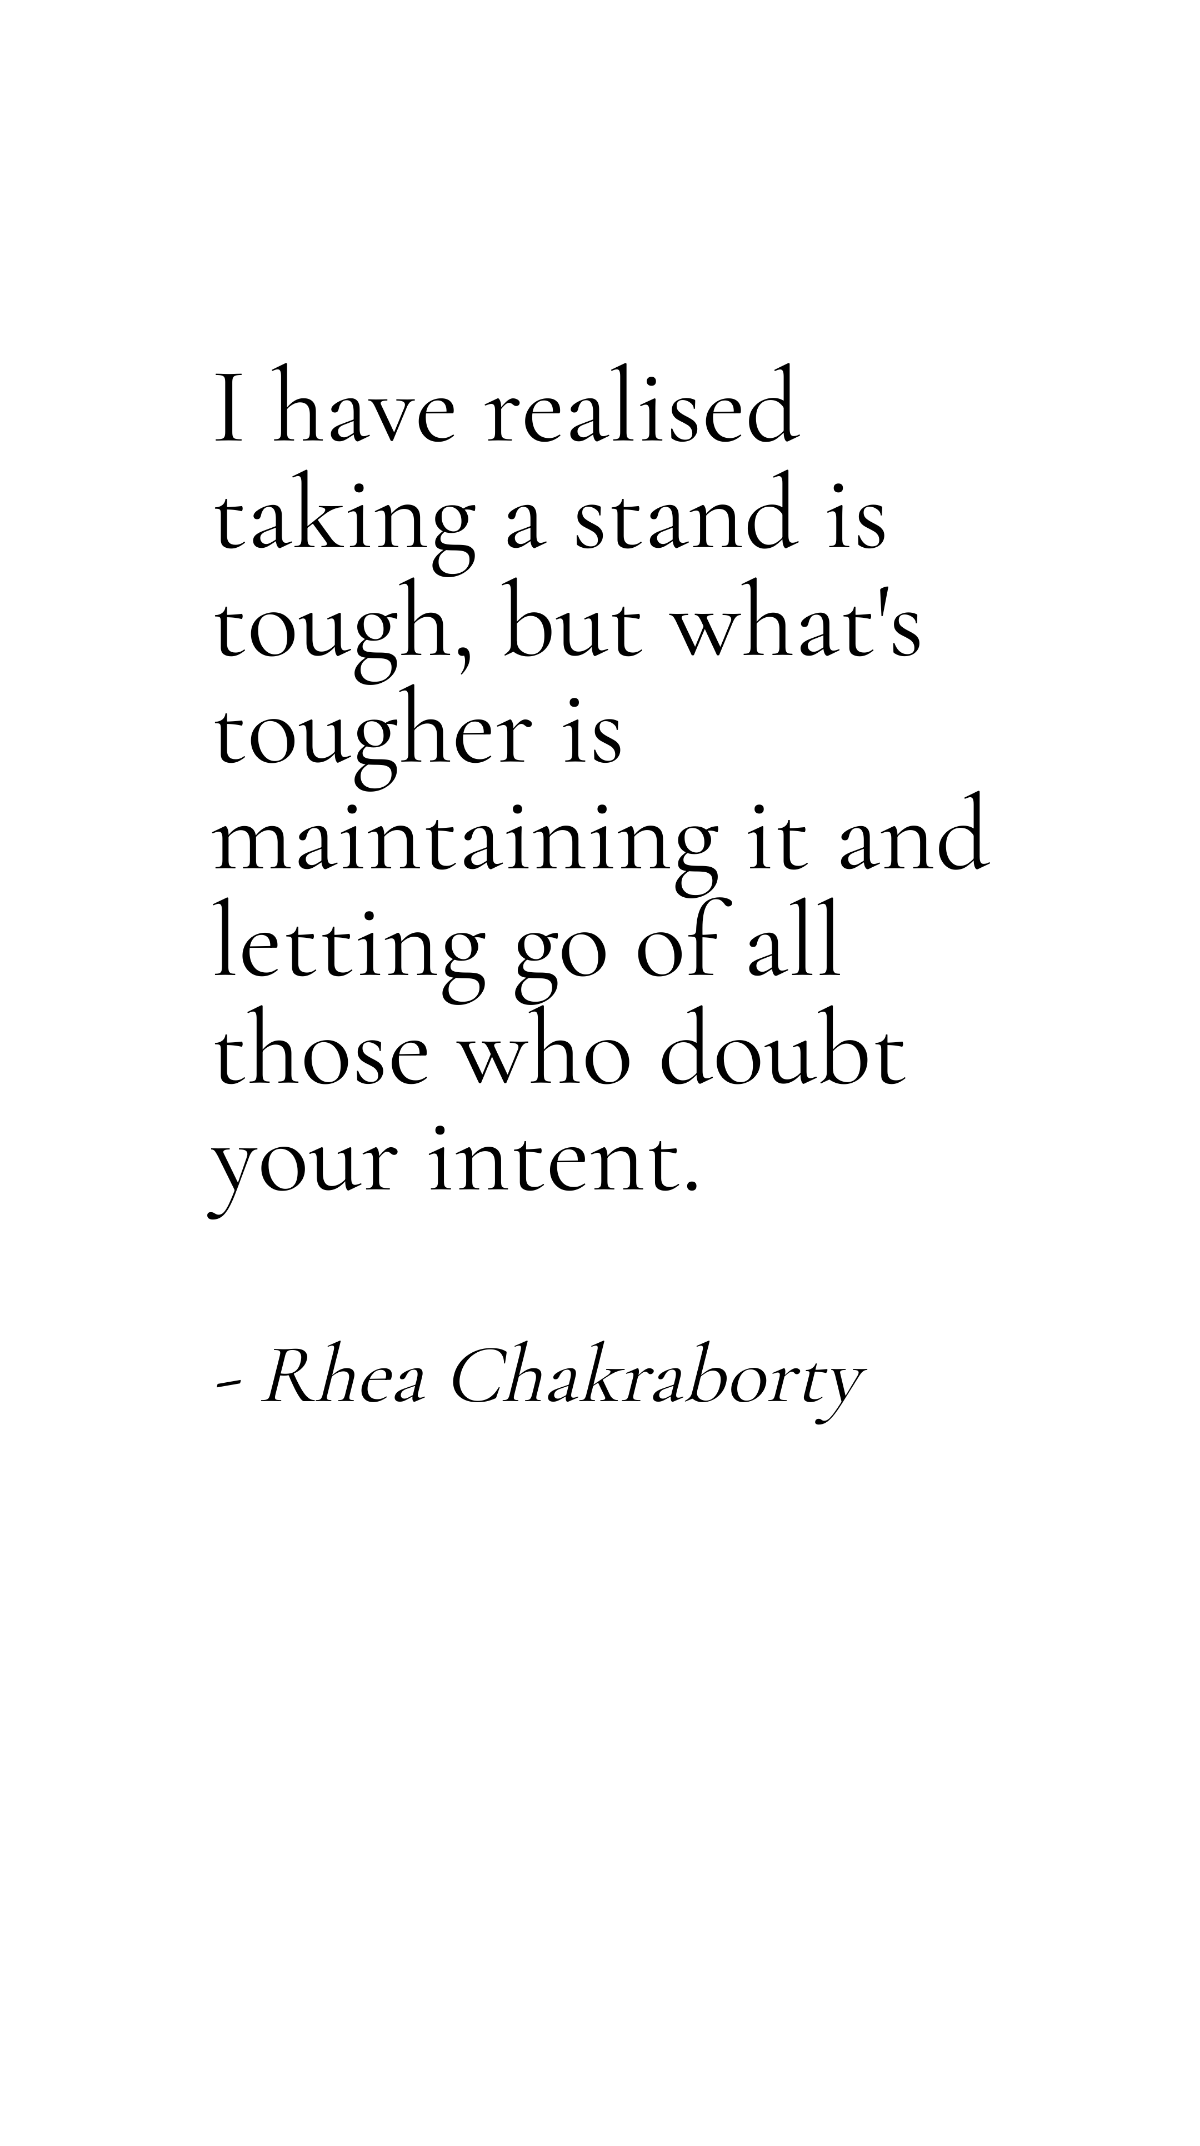 Rhea Chakraborty - I have realised taking a stand is tough, but what's tougher is maintaining it and letting go of all those who doubt your intent.